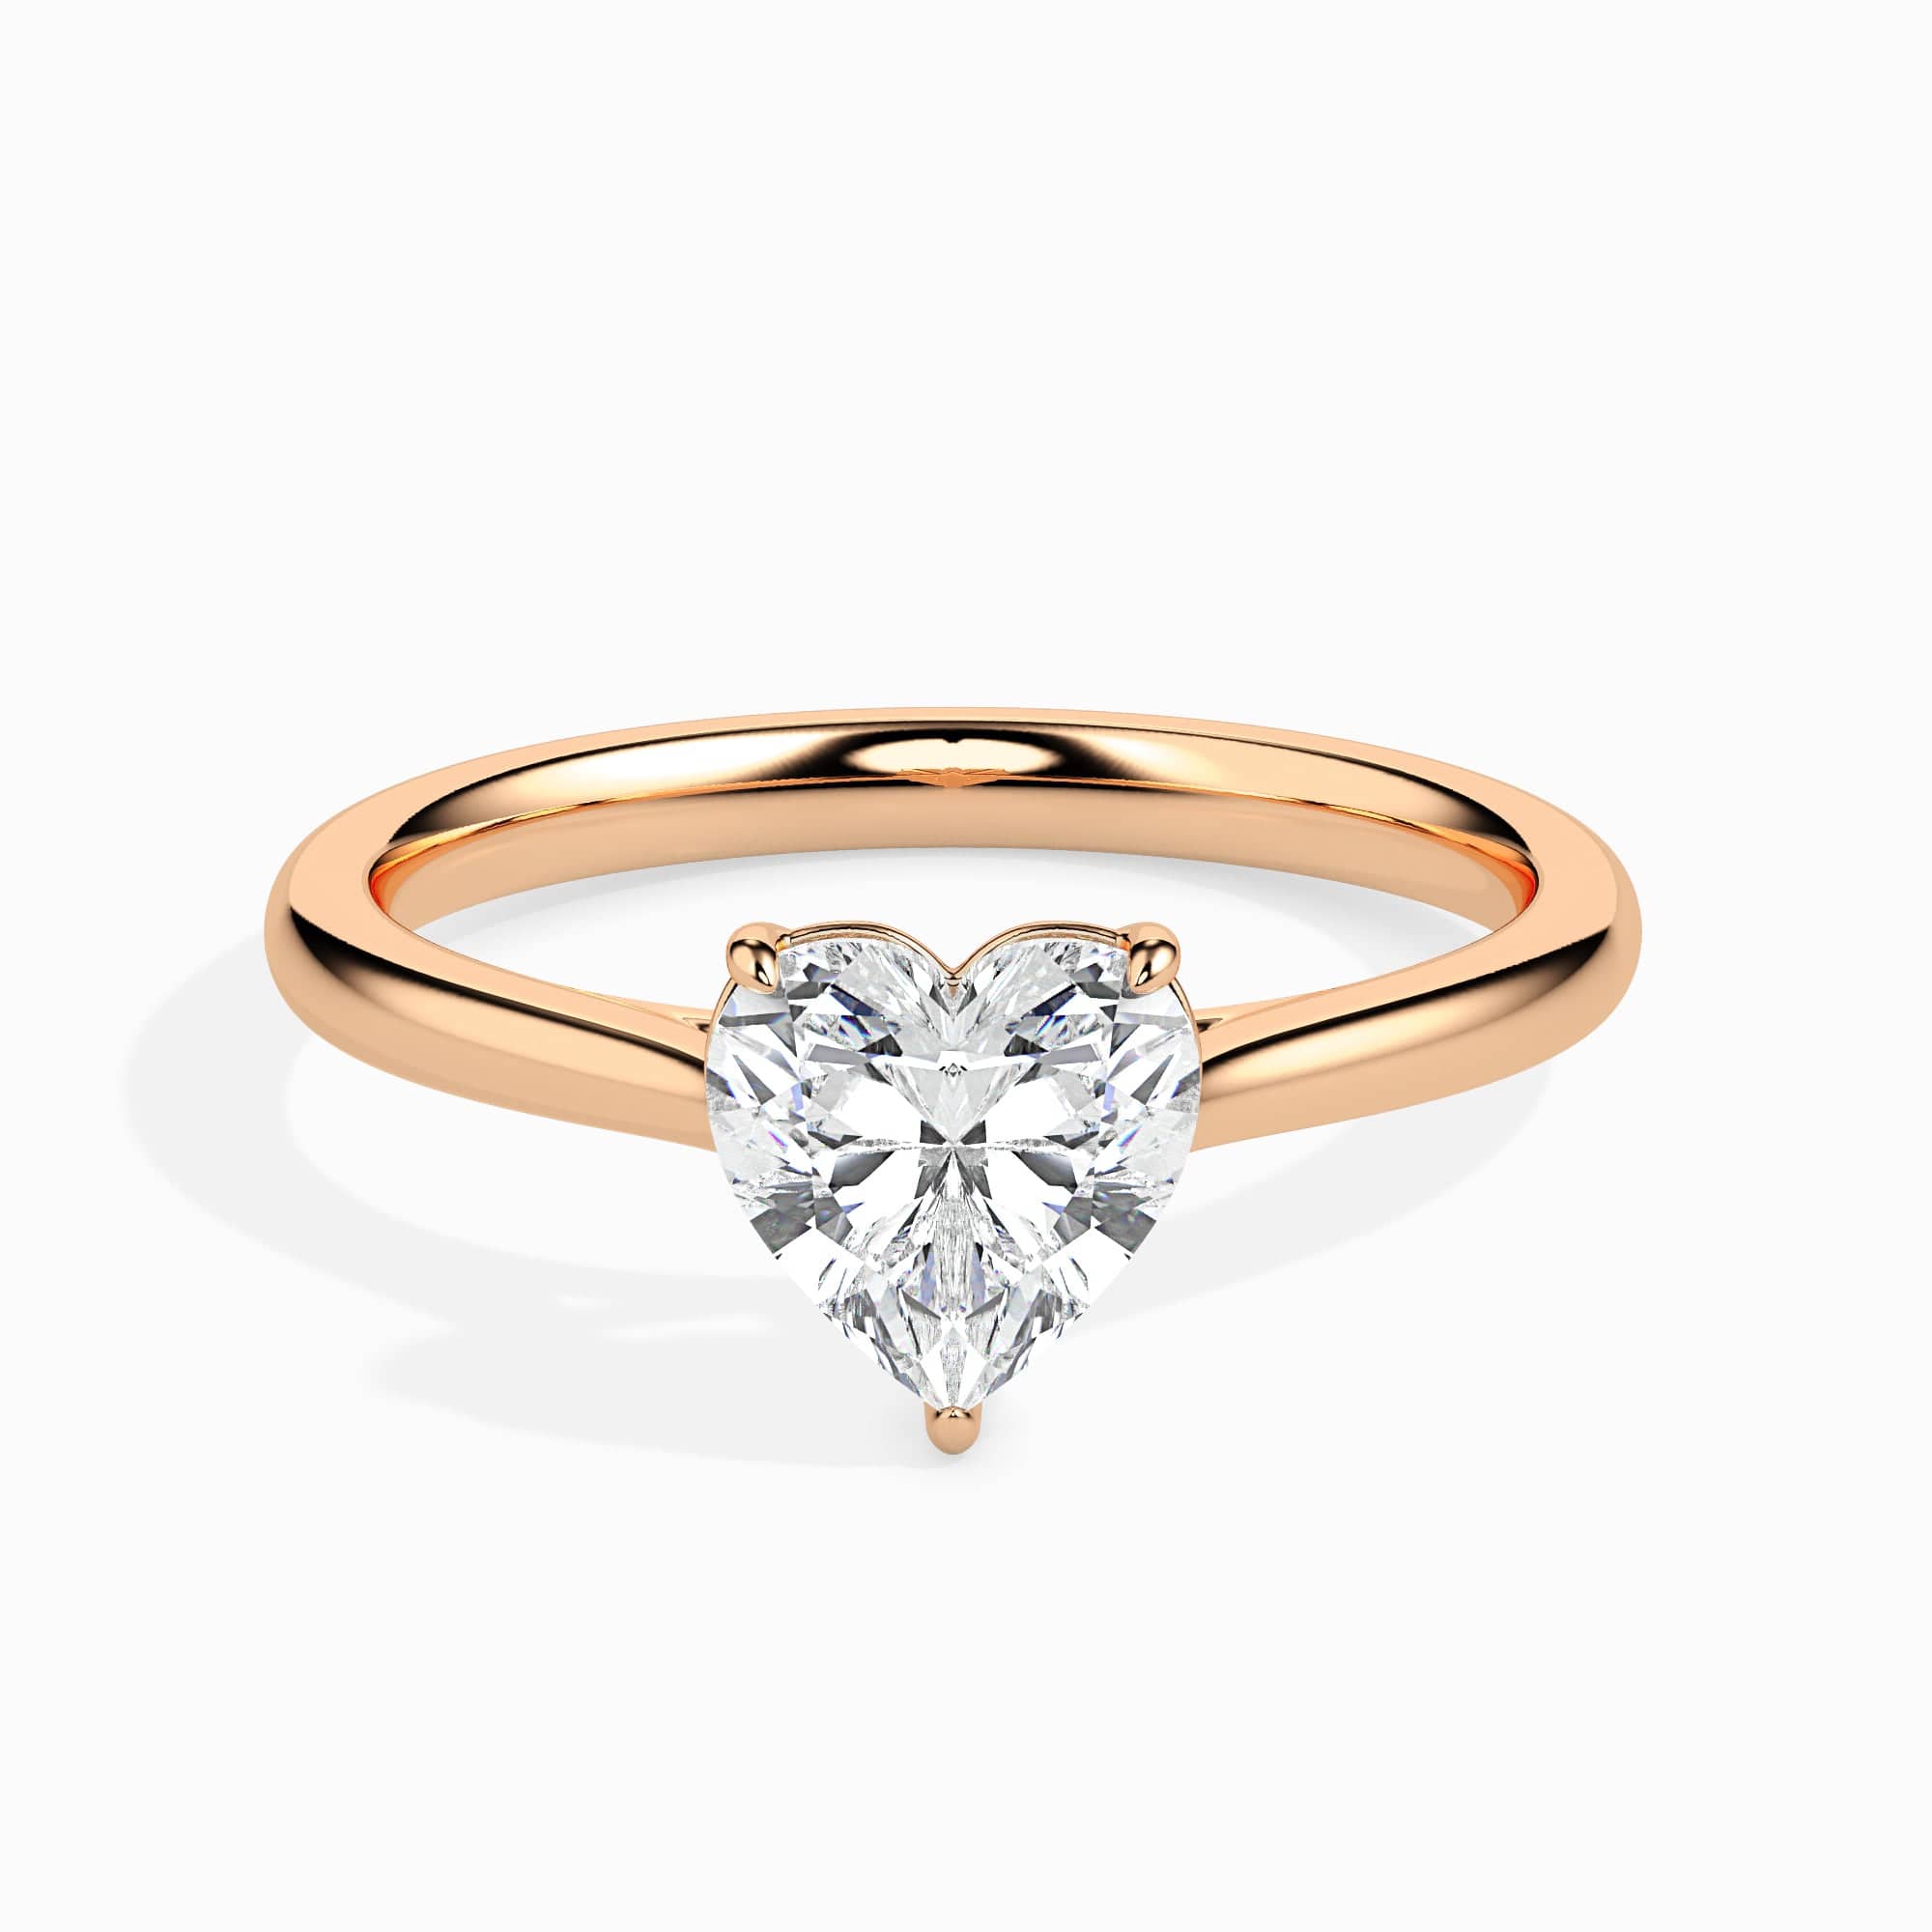 ROSE GOLD DOUBLE HEART FASHION RING WITH DIAMONDS, .05 CT TW - Howard's  Jewelry Center